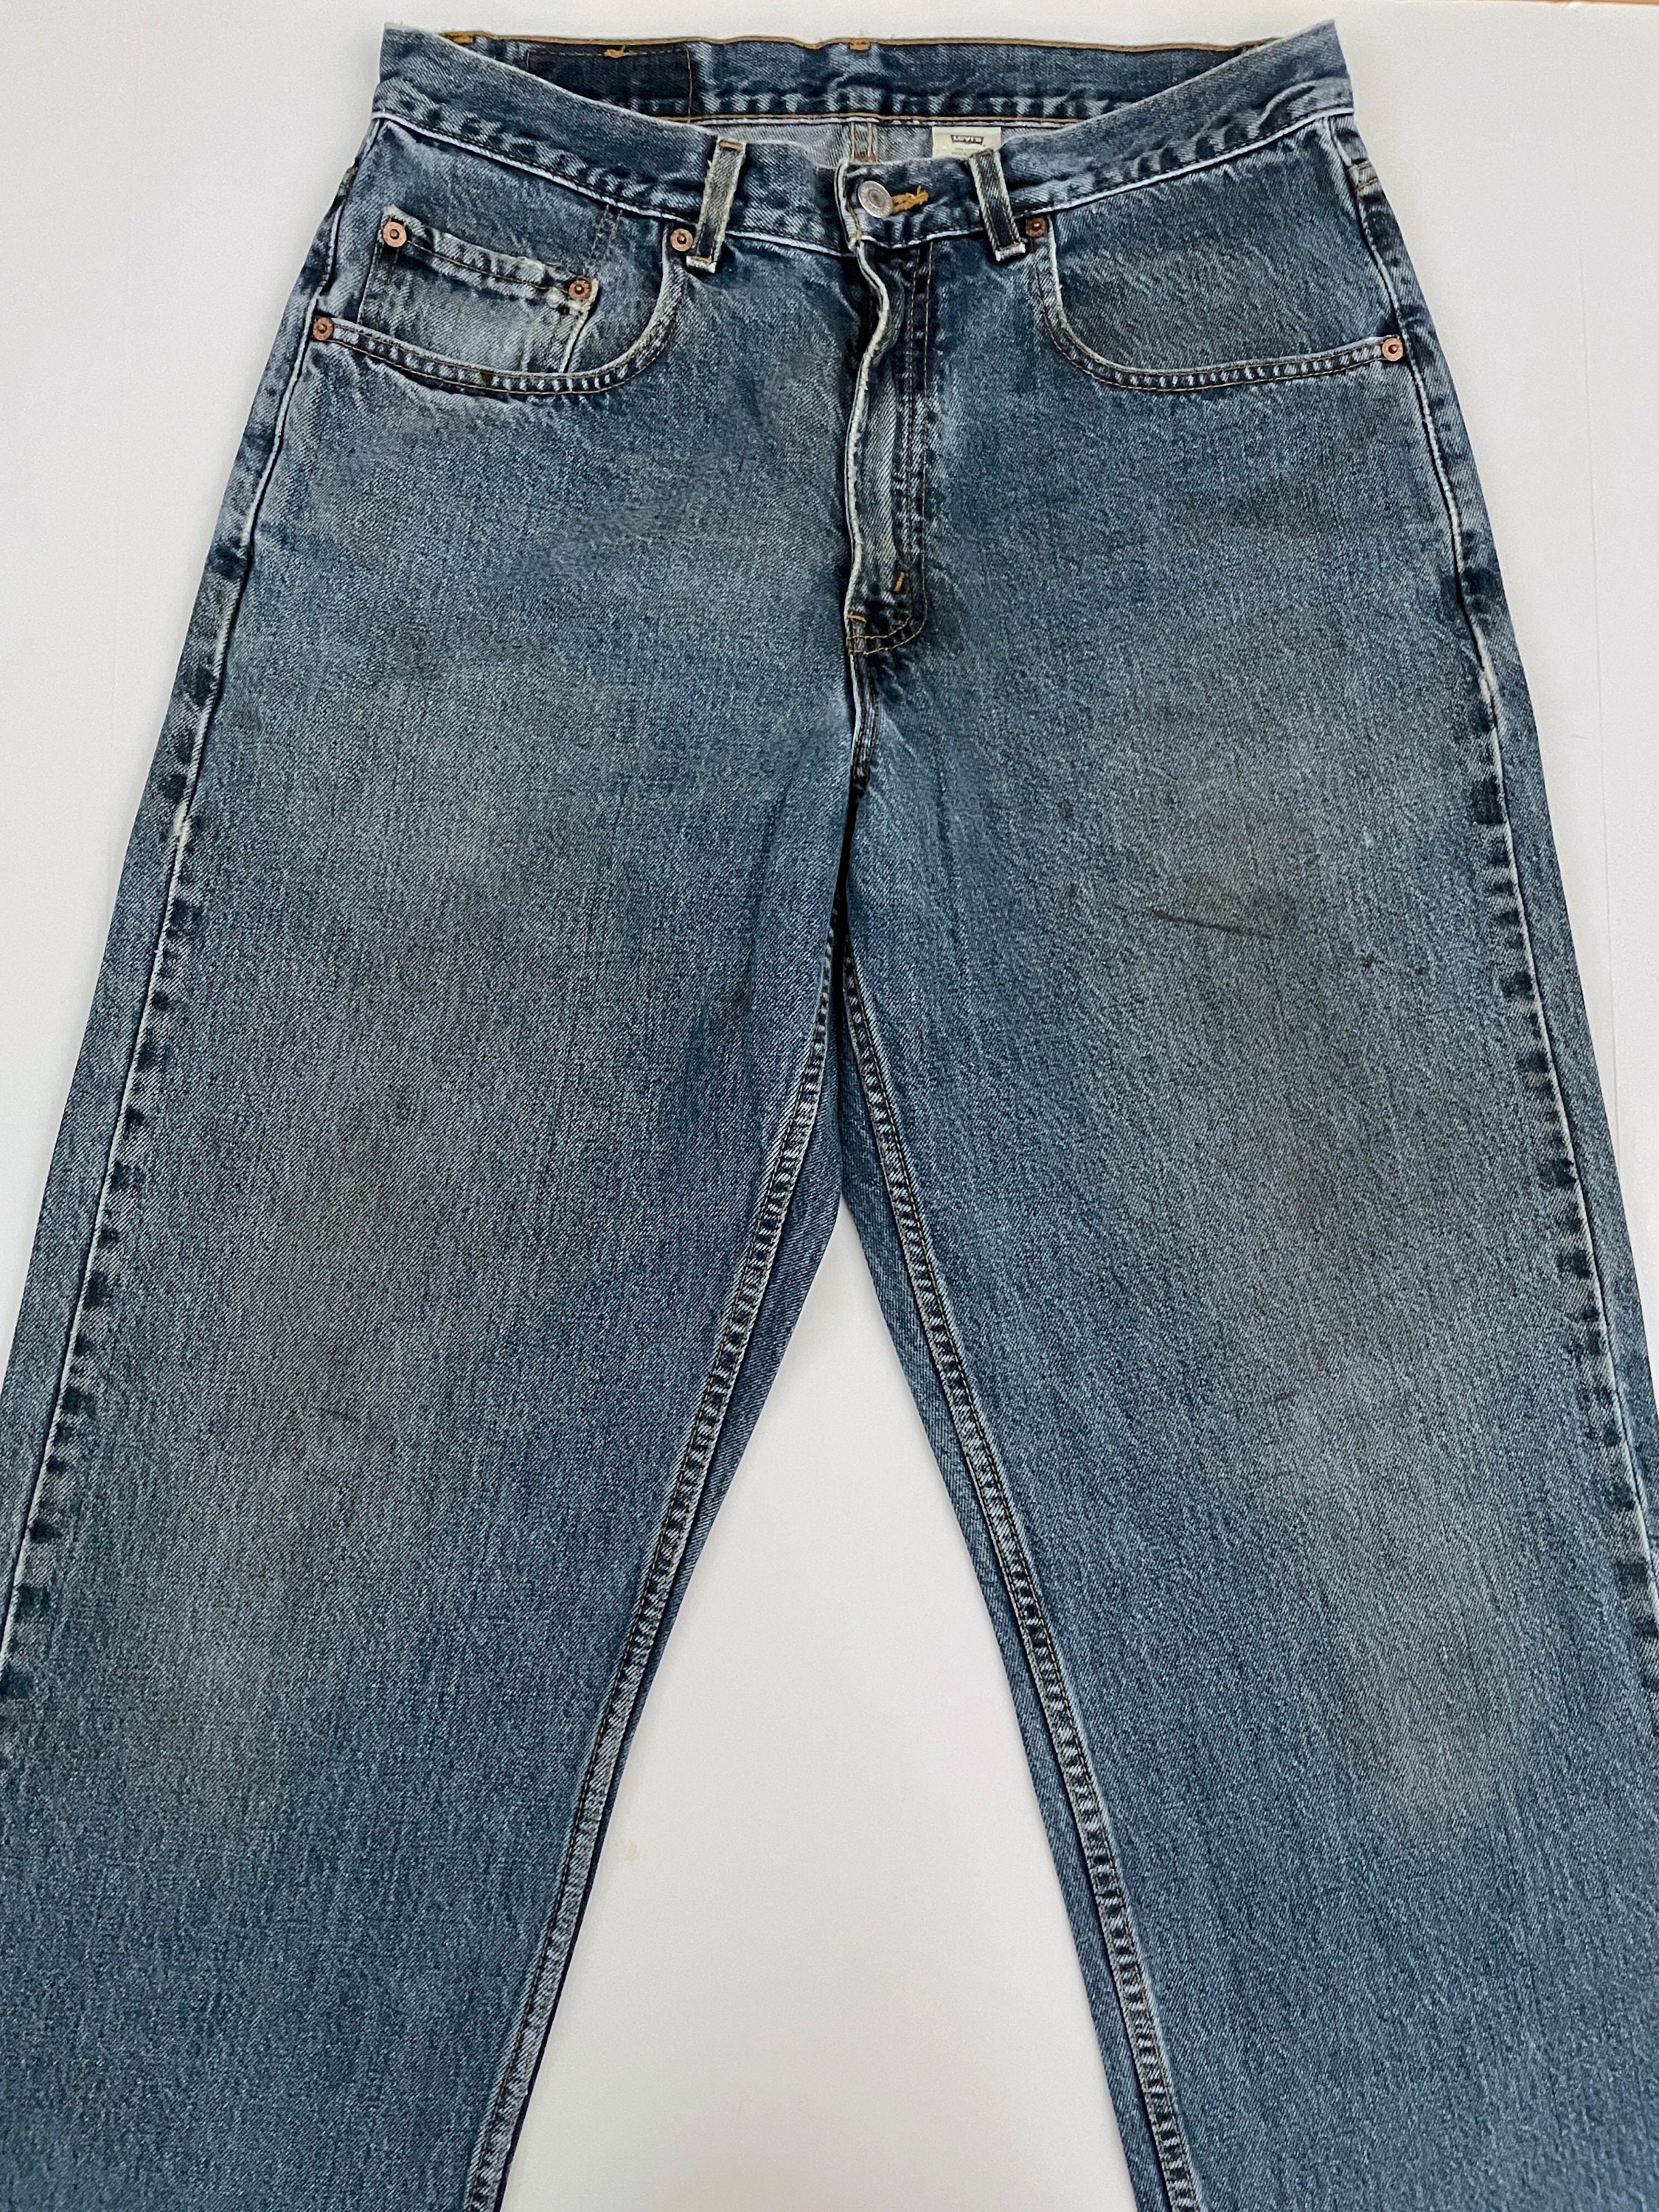 Vintage 00's Levi's 569 Jeans Loose Straight Fit - Etsy Hong Kong